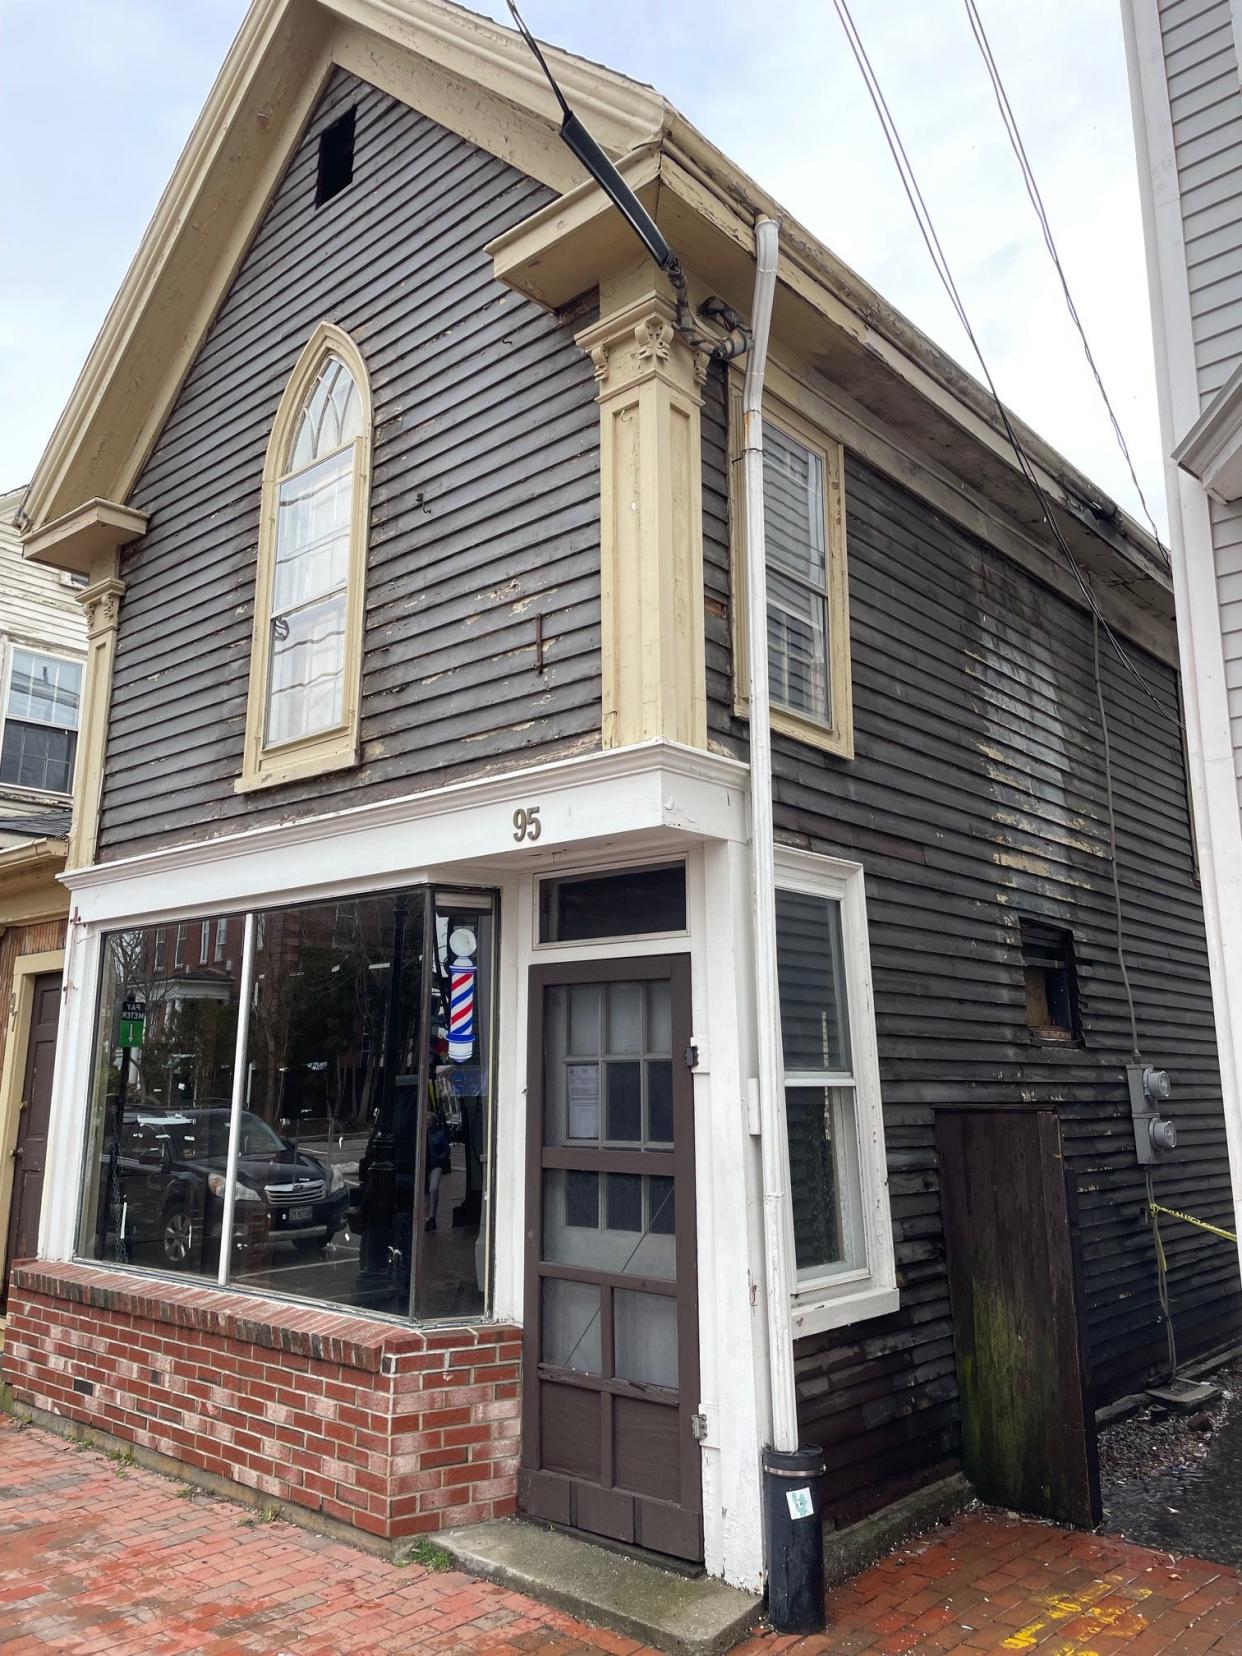 John's Barber Shop was formerly housed at the 95 Daniel St. building in Portsmouth, which the current owner wants to demolish.